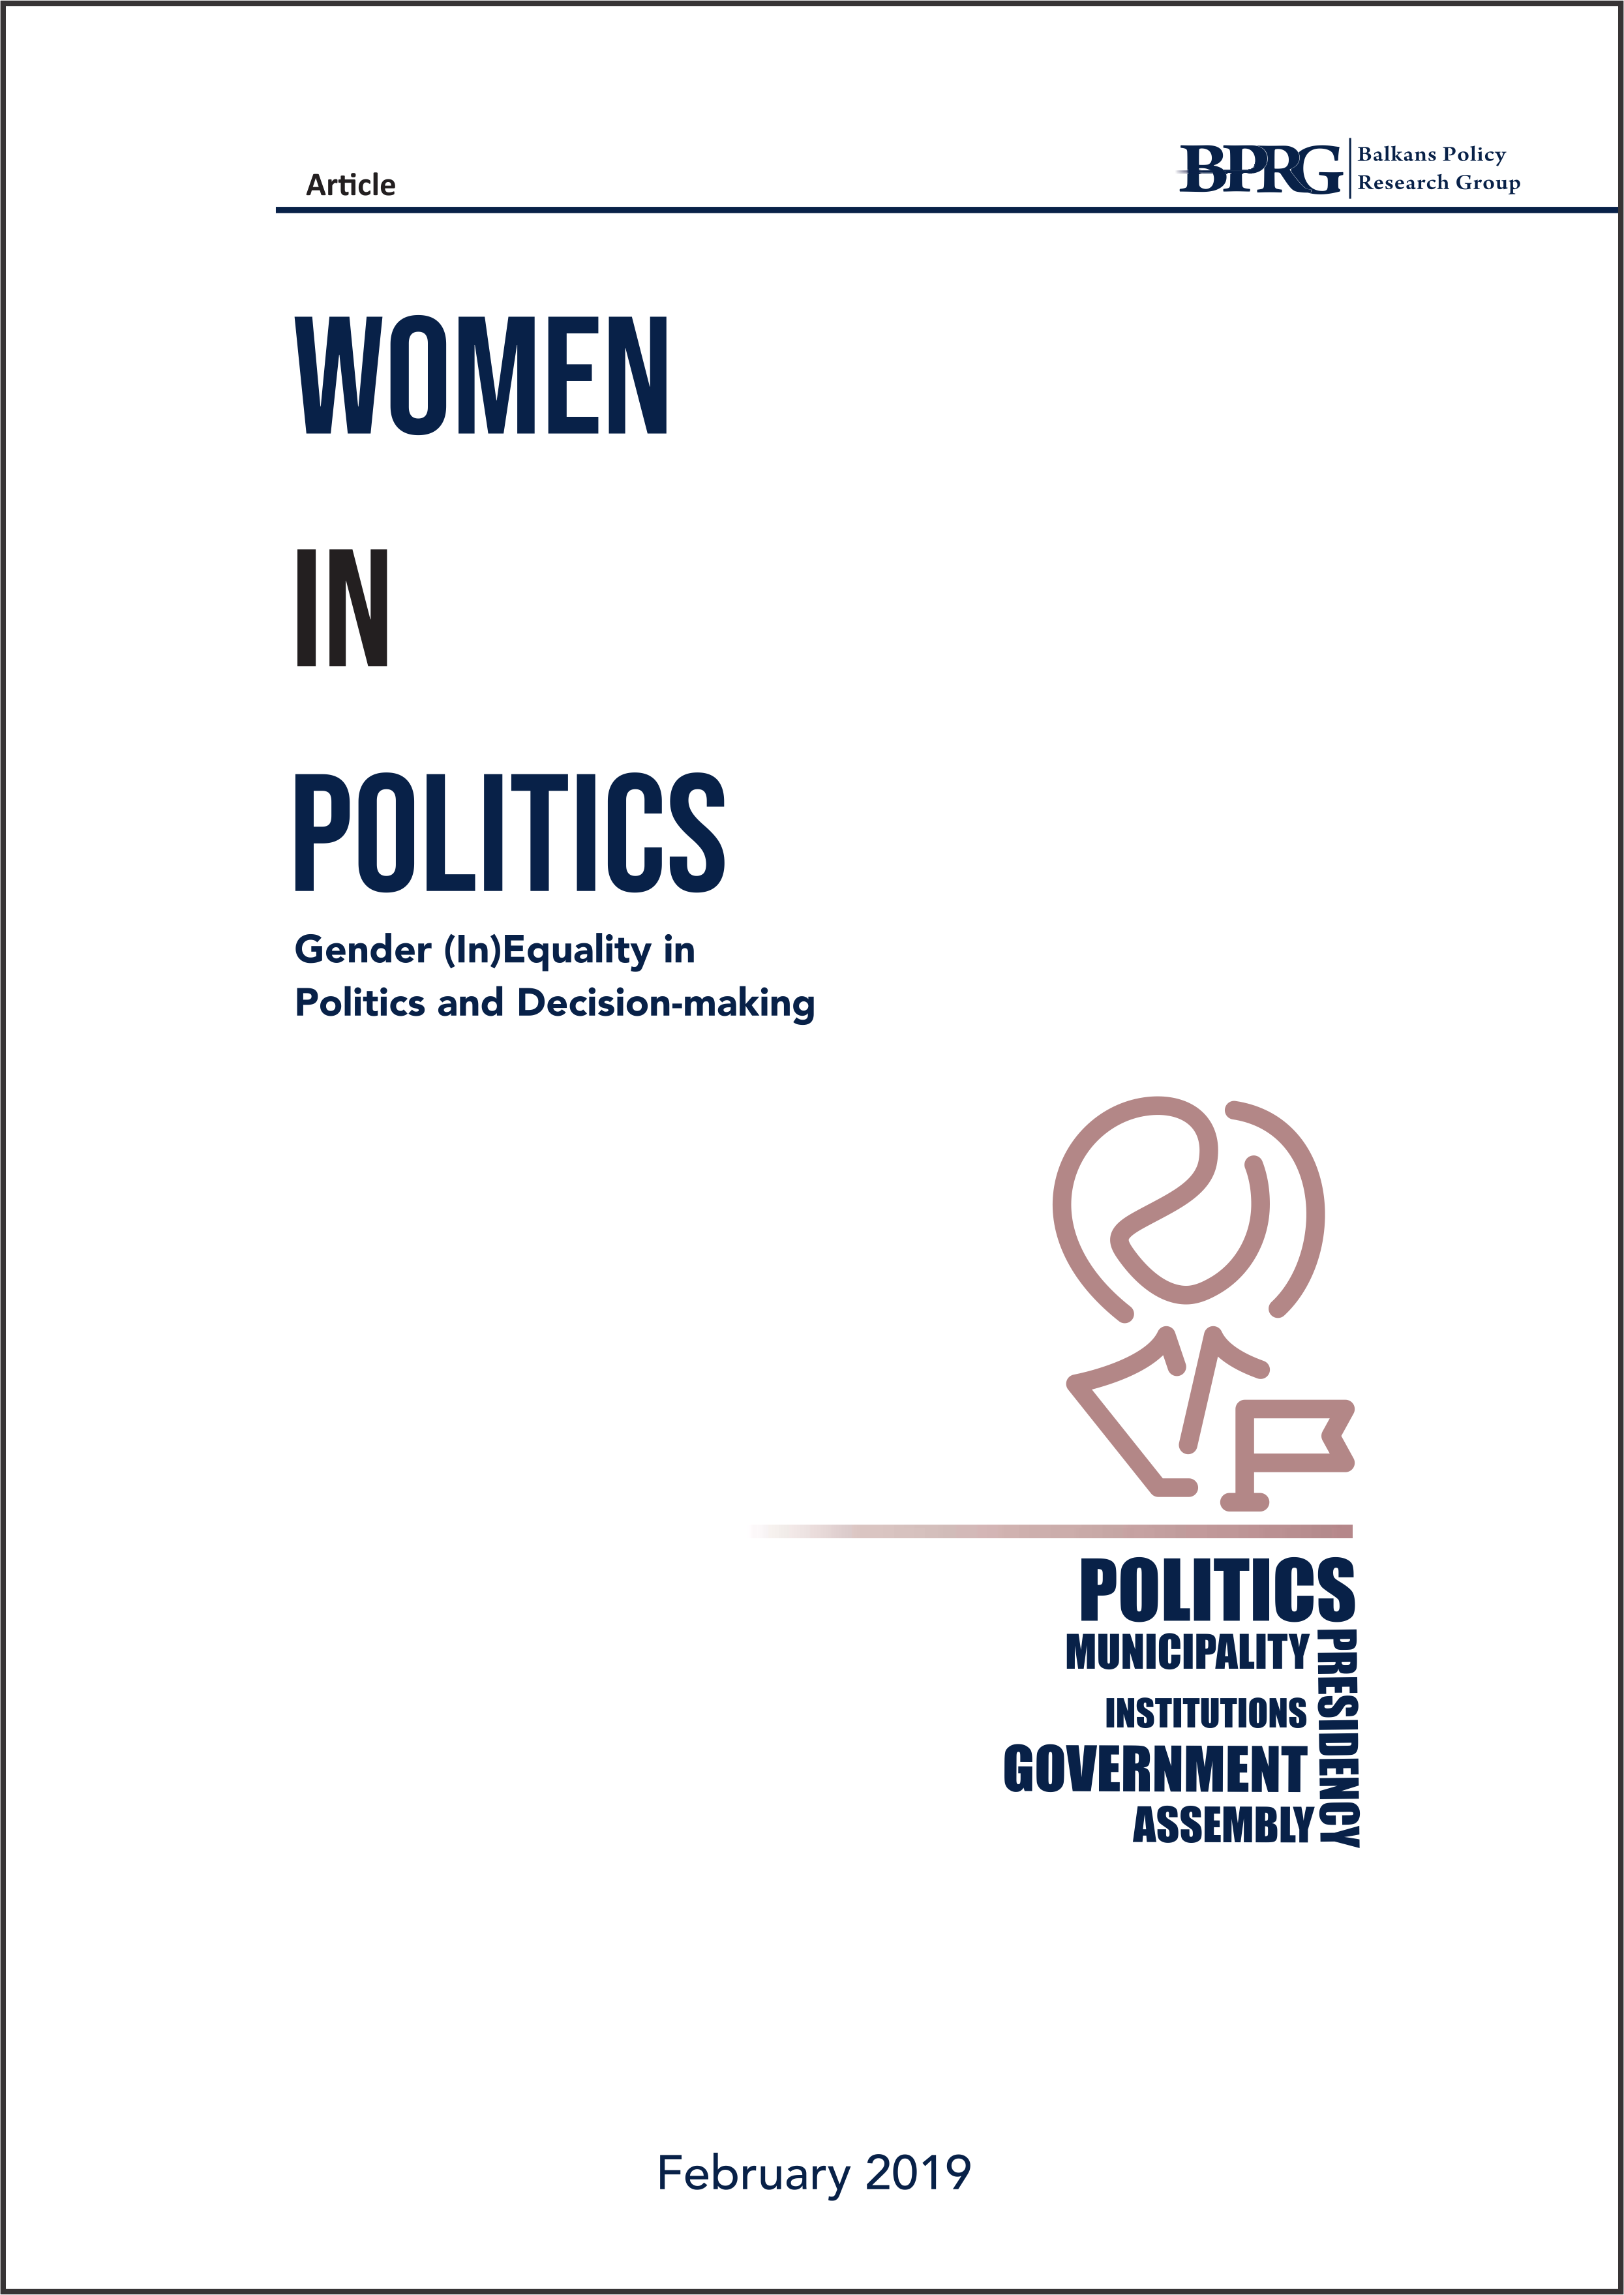 Women in Politics: Gender (In)Equality in politics and decision-making